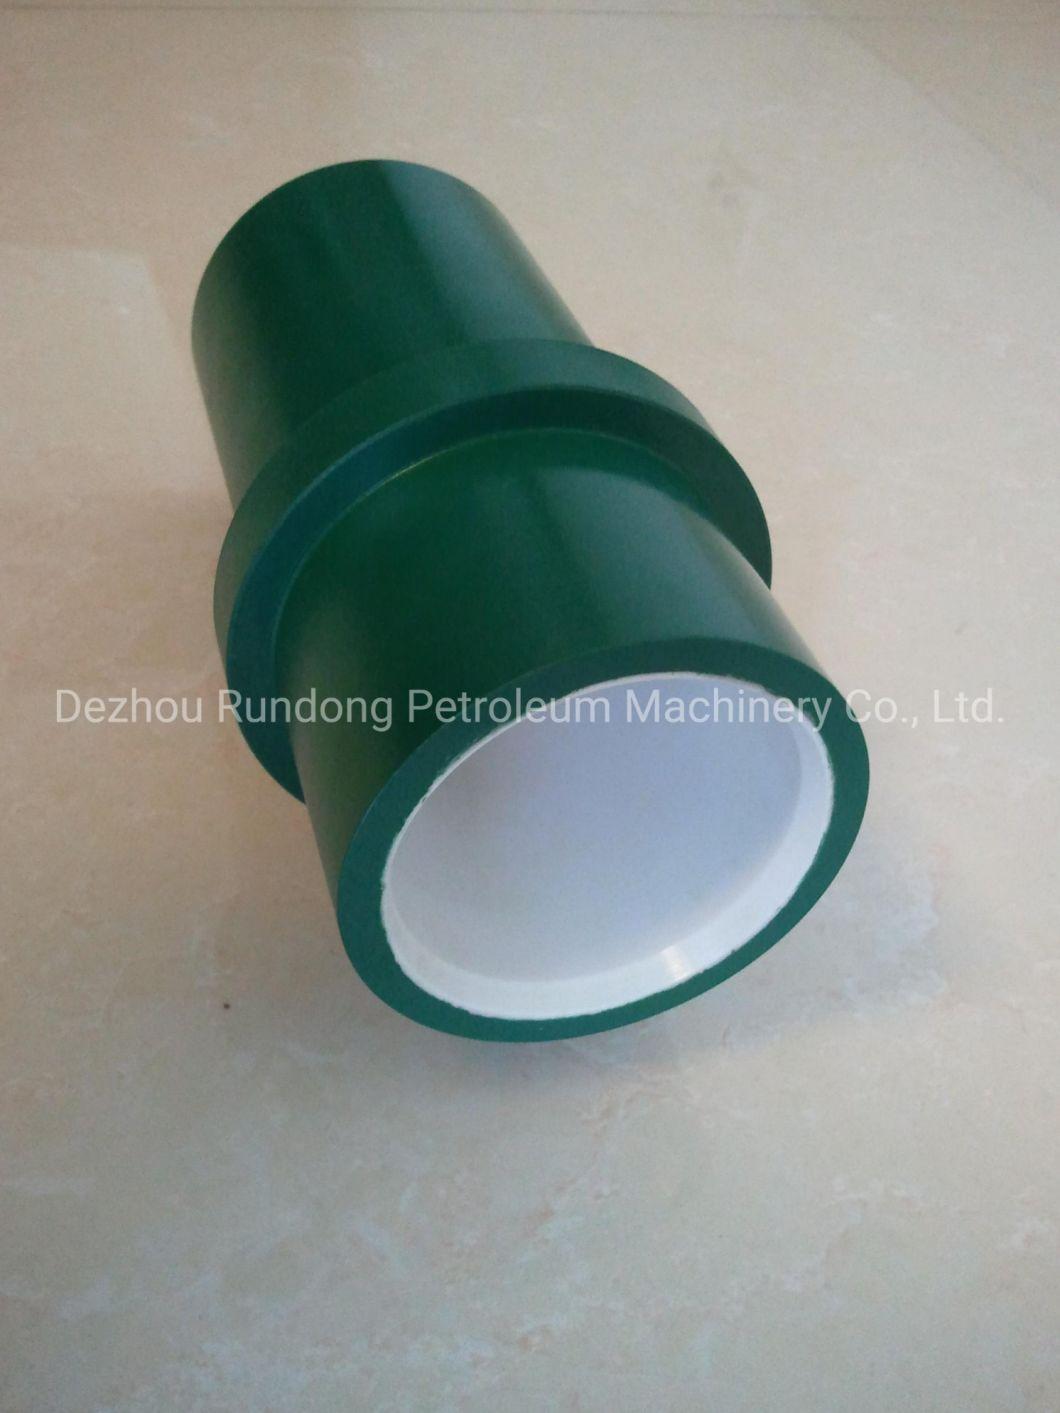 Chinese Manufacture of Bw Mud Pump Spare Parts Ceramic Bushing in Drilling Field